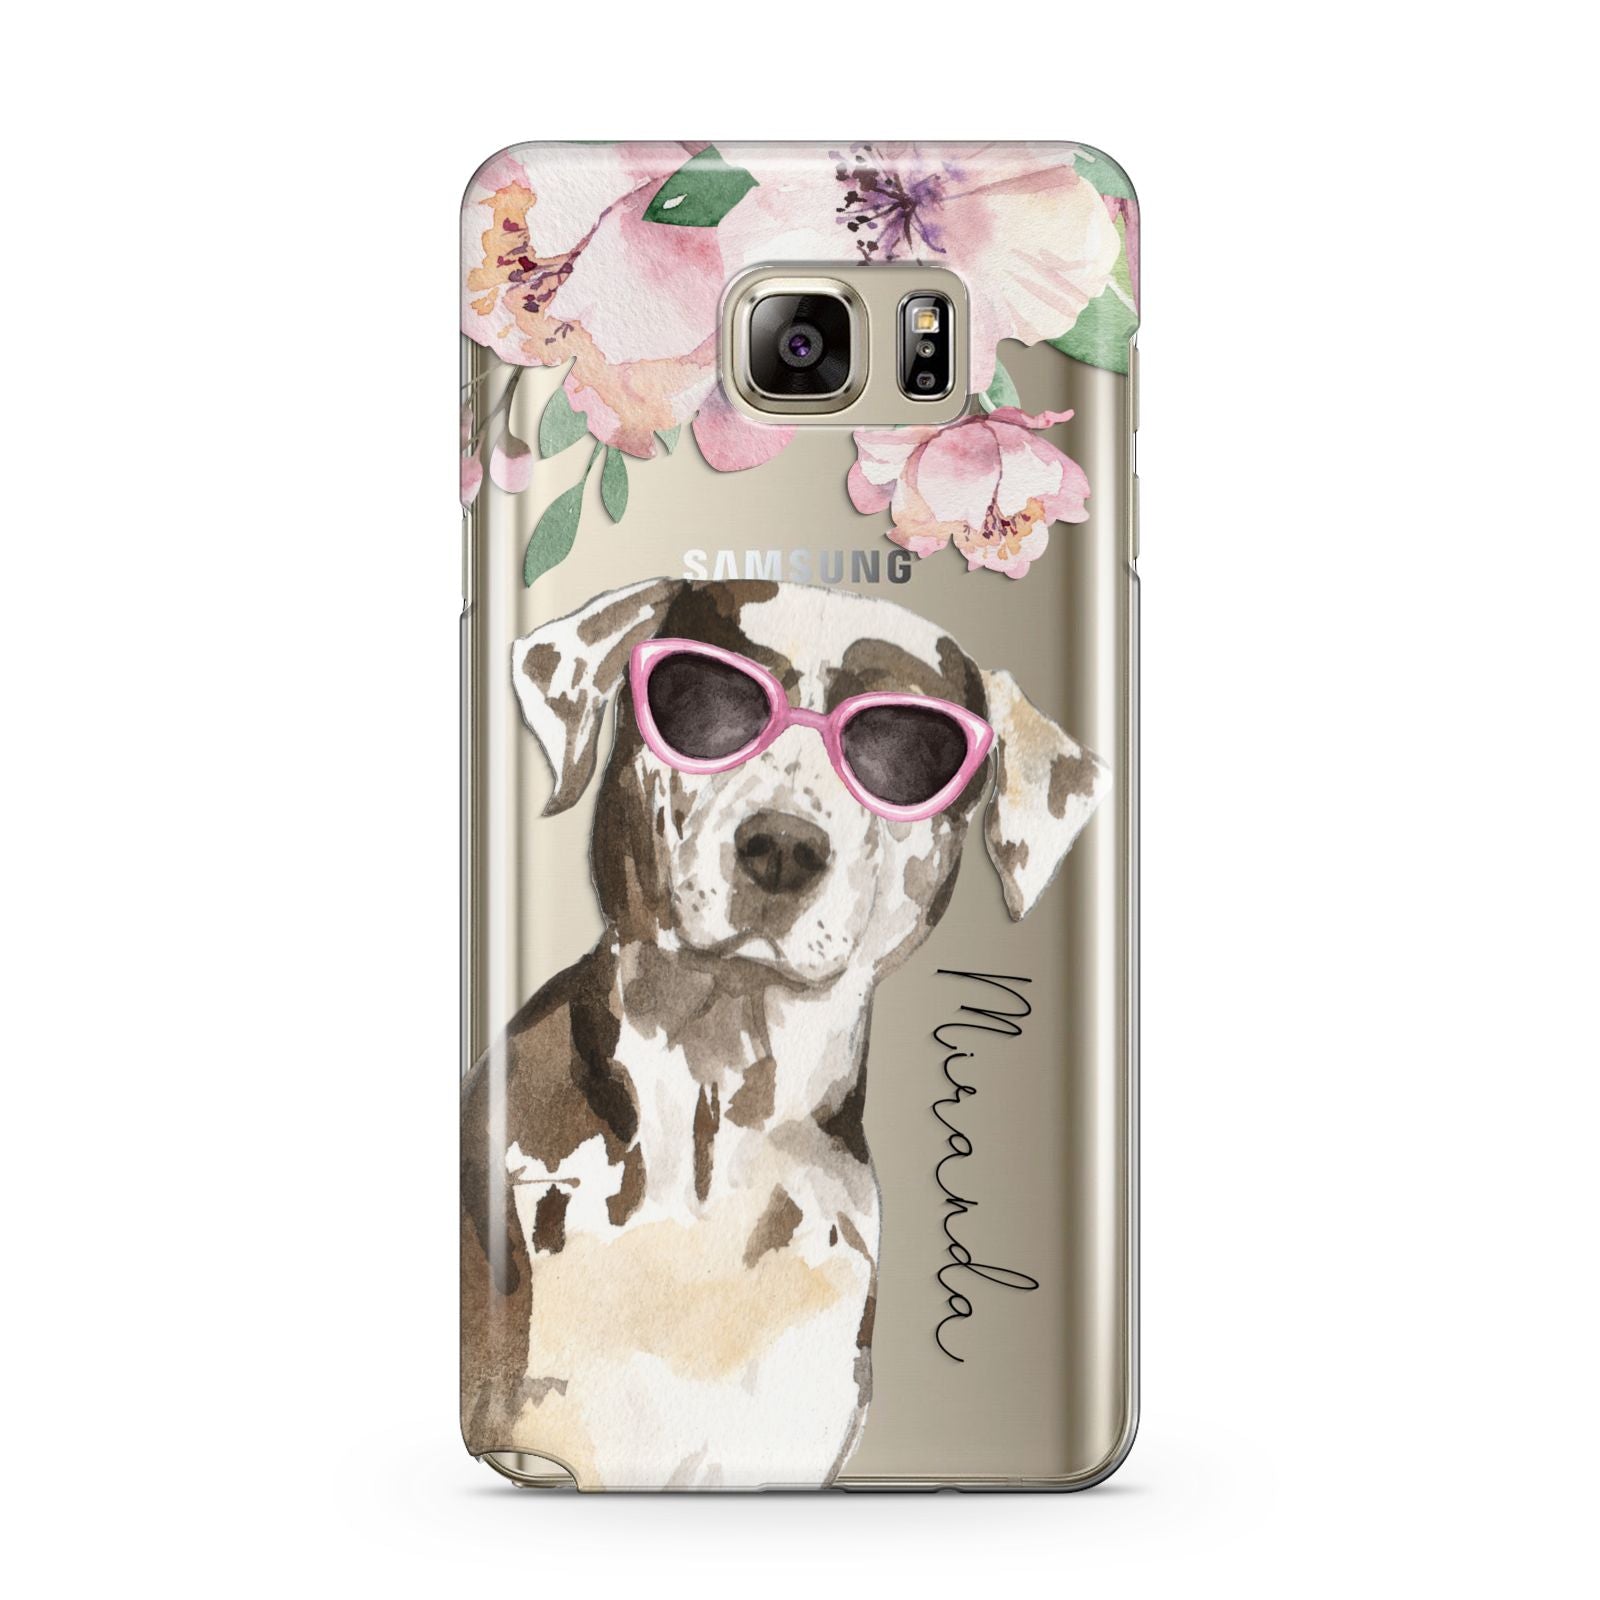 Personalised Catahoula Leopard Dog Samsung Galaxy Note 5 Case